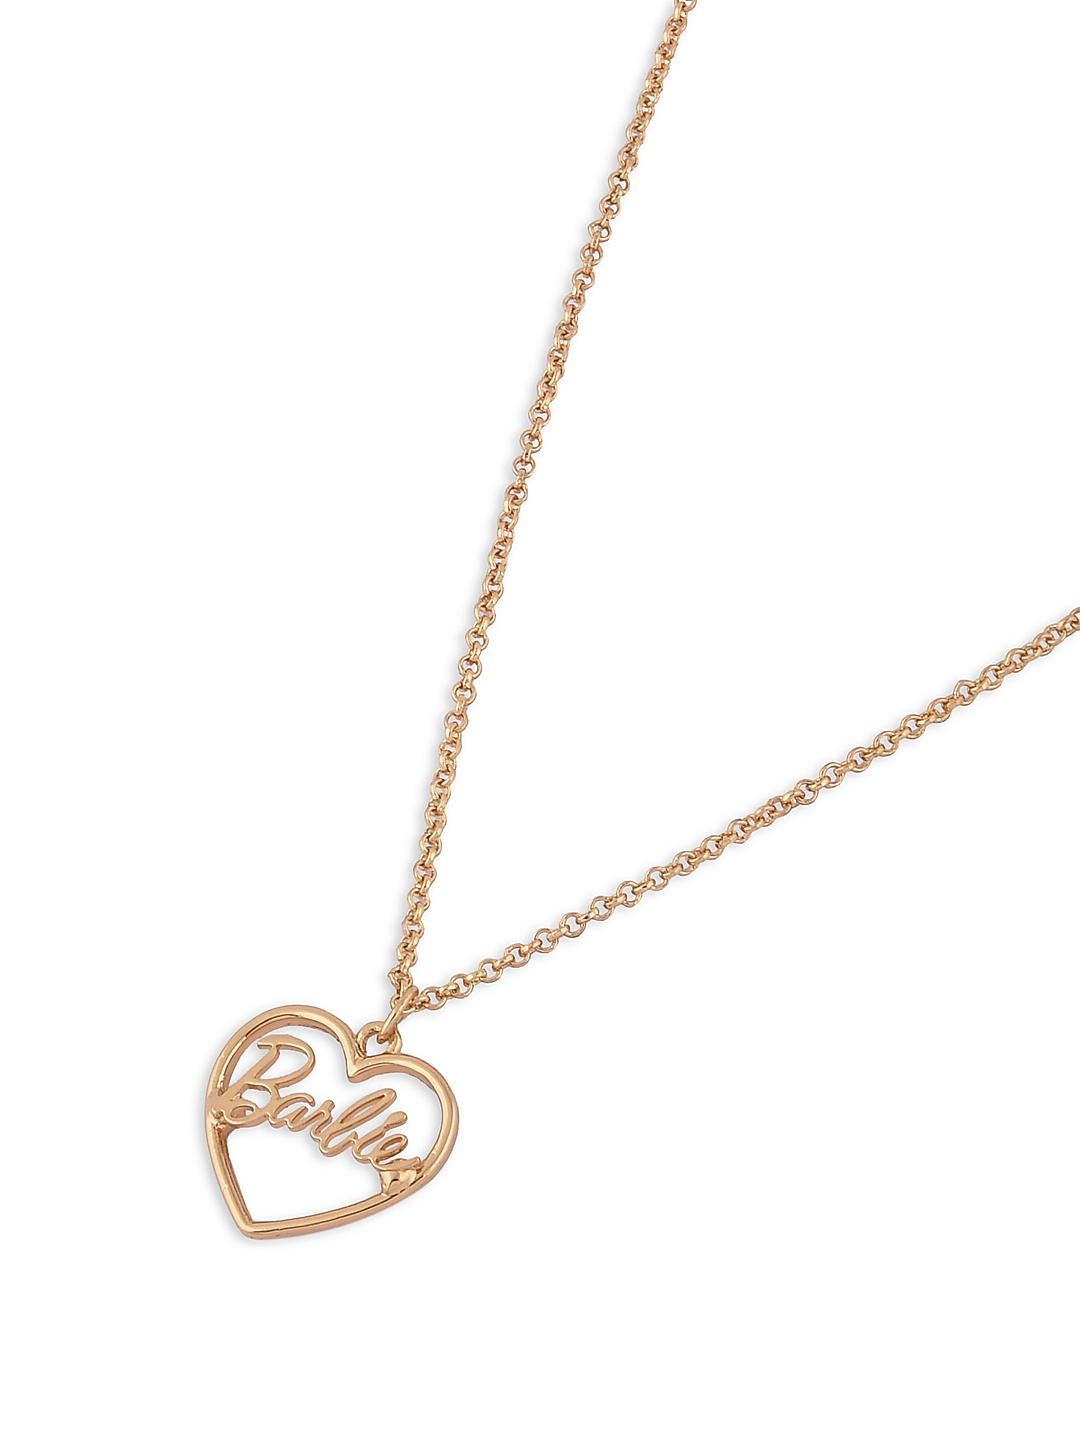 Shop online Barbie(TM) Limited Edition CZ Stone Studded Heart Charm Link Chain  Necklace @ Best Price